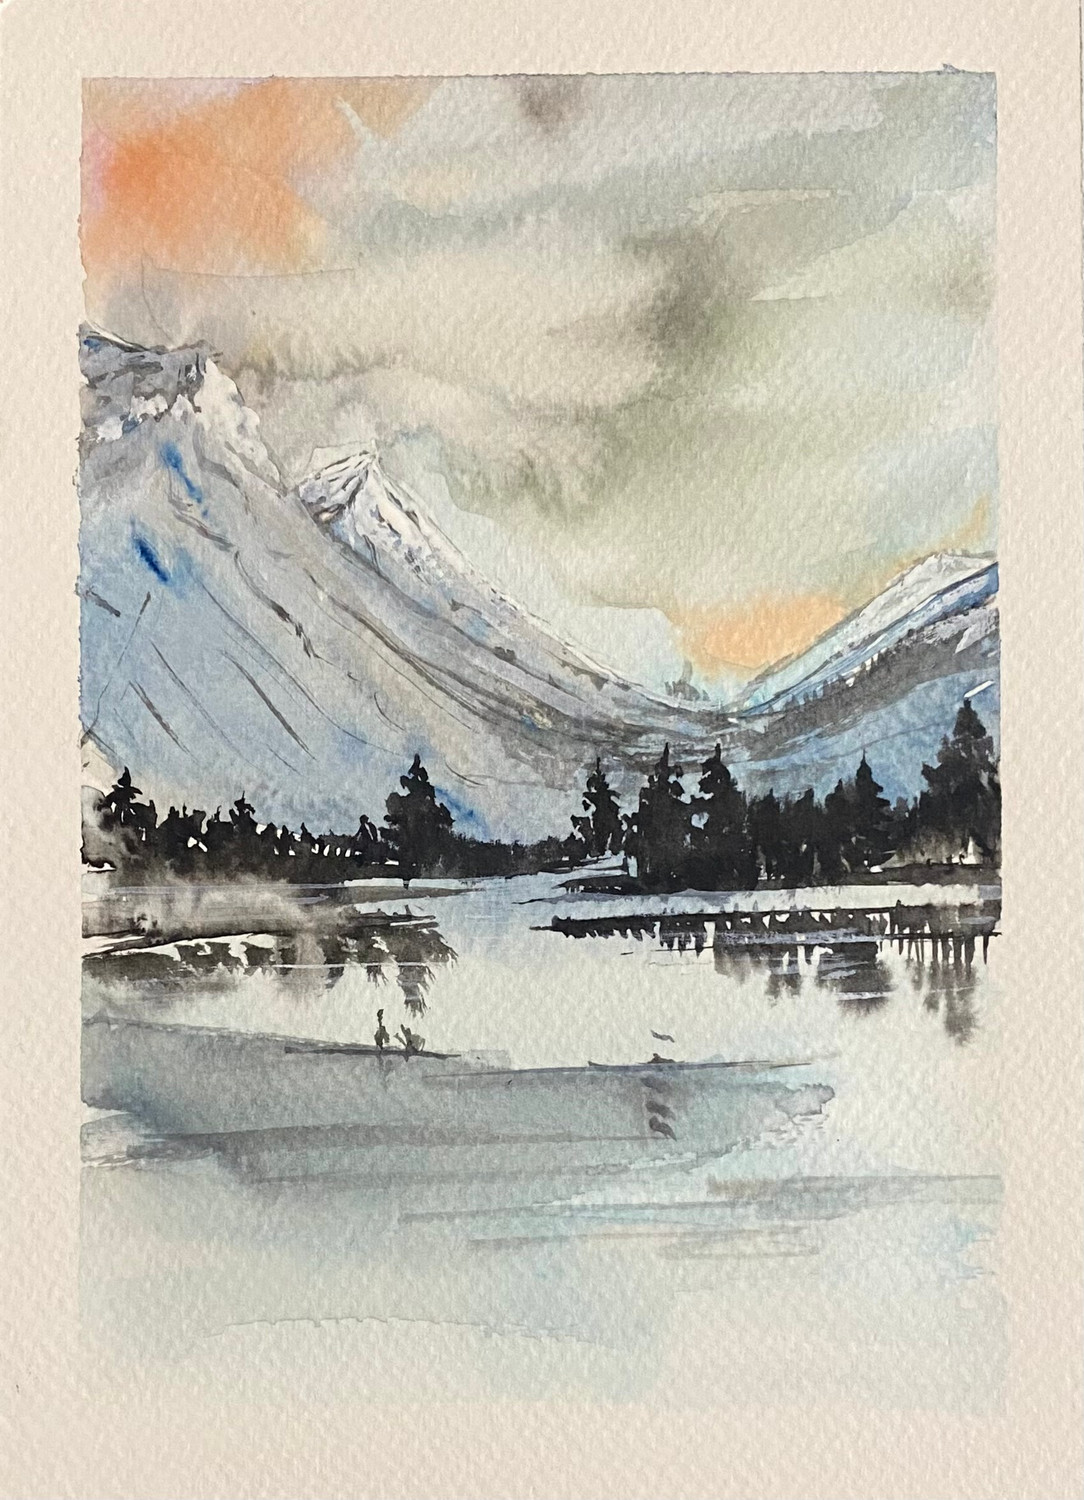 4 Tips for Sketching Watercolor Landscapes On Location | Artists Network